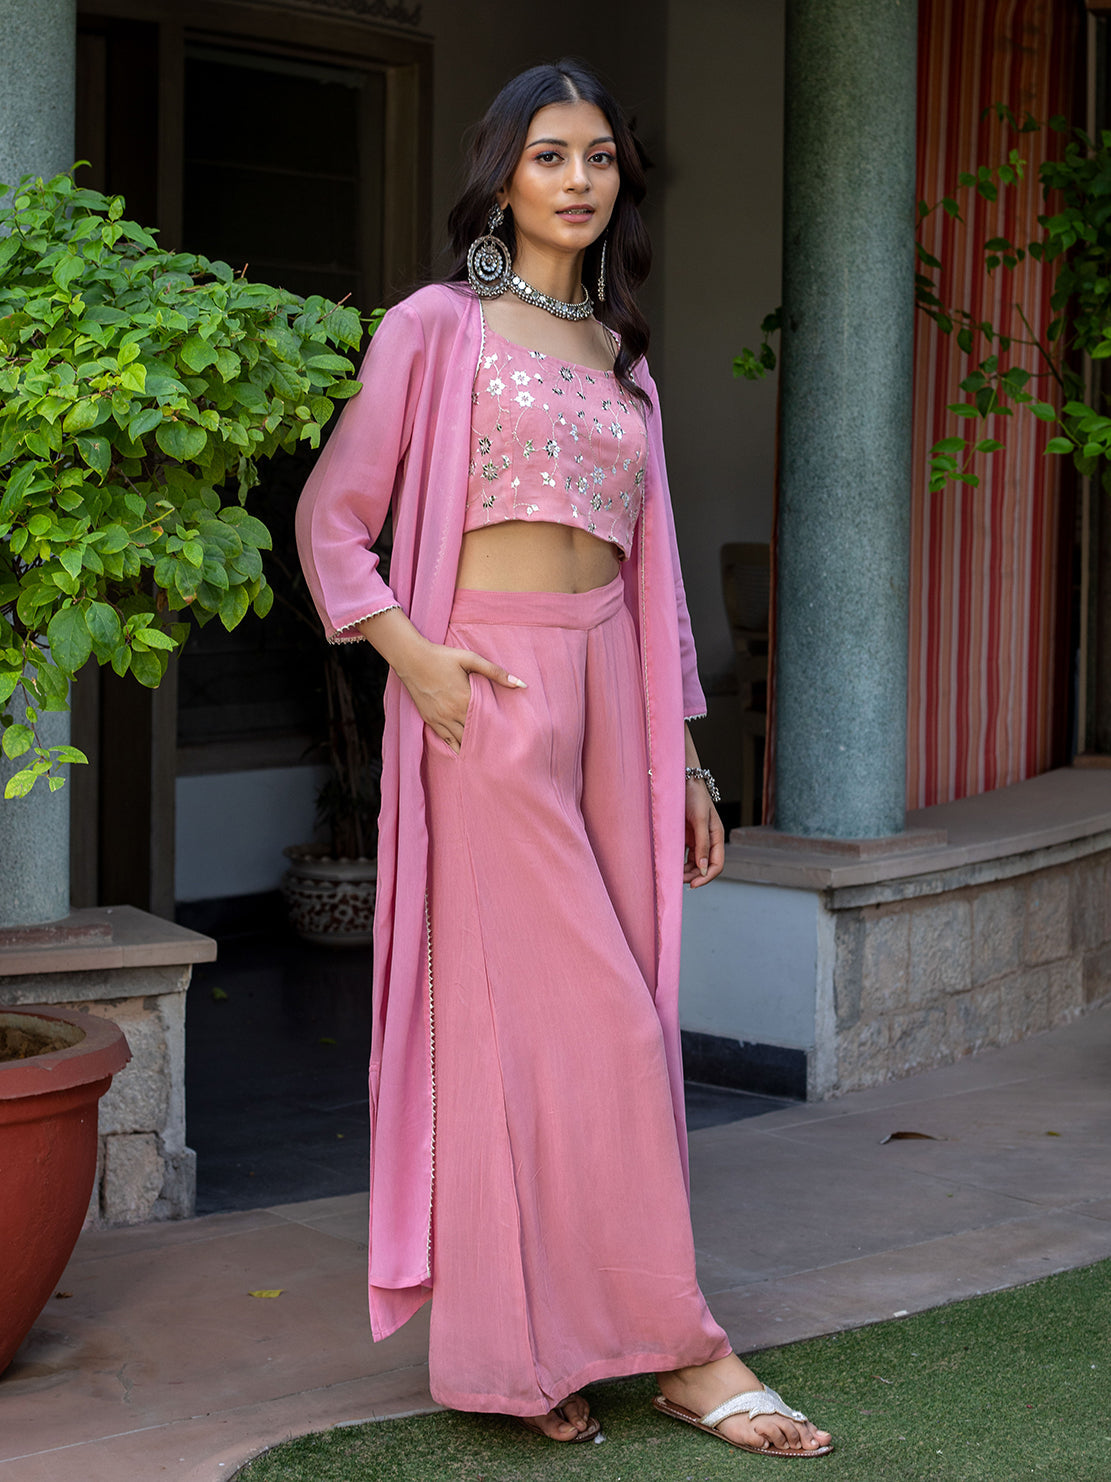 unveil-charm-in-our-pink-co-ord-set-featuring-an-embroidered-jaal-on-the-crop-top-effortless-elegance-and-style-perfect-for-a-fashionable-statement